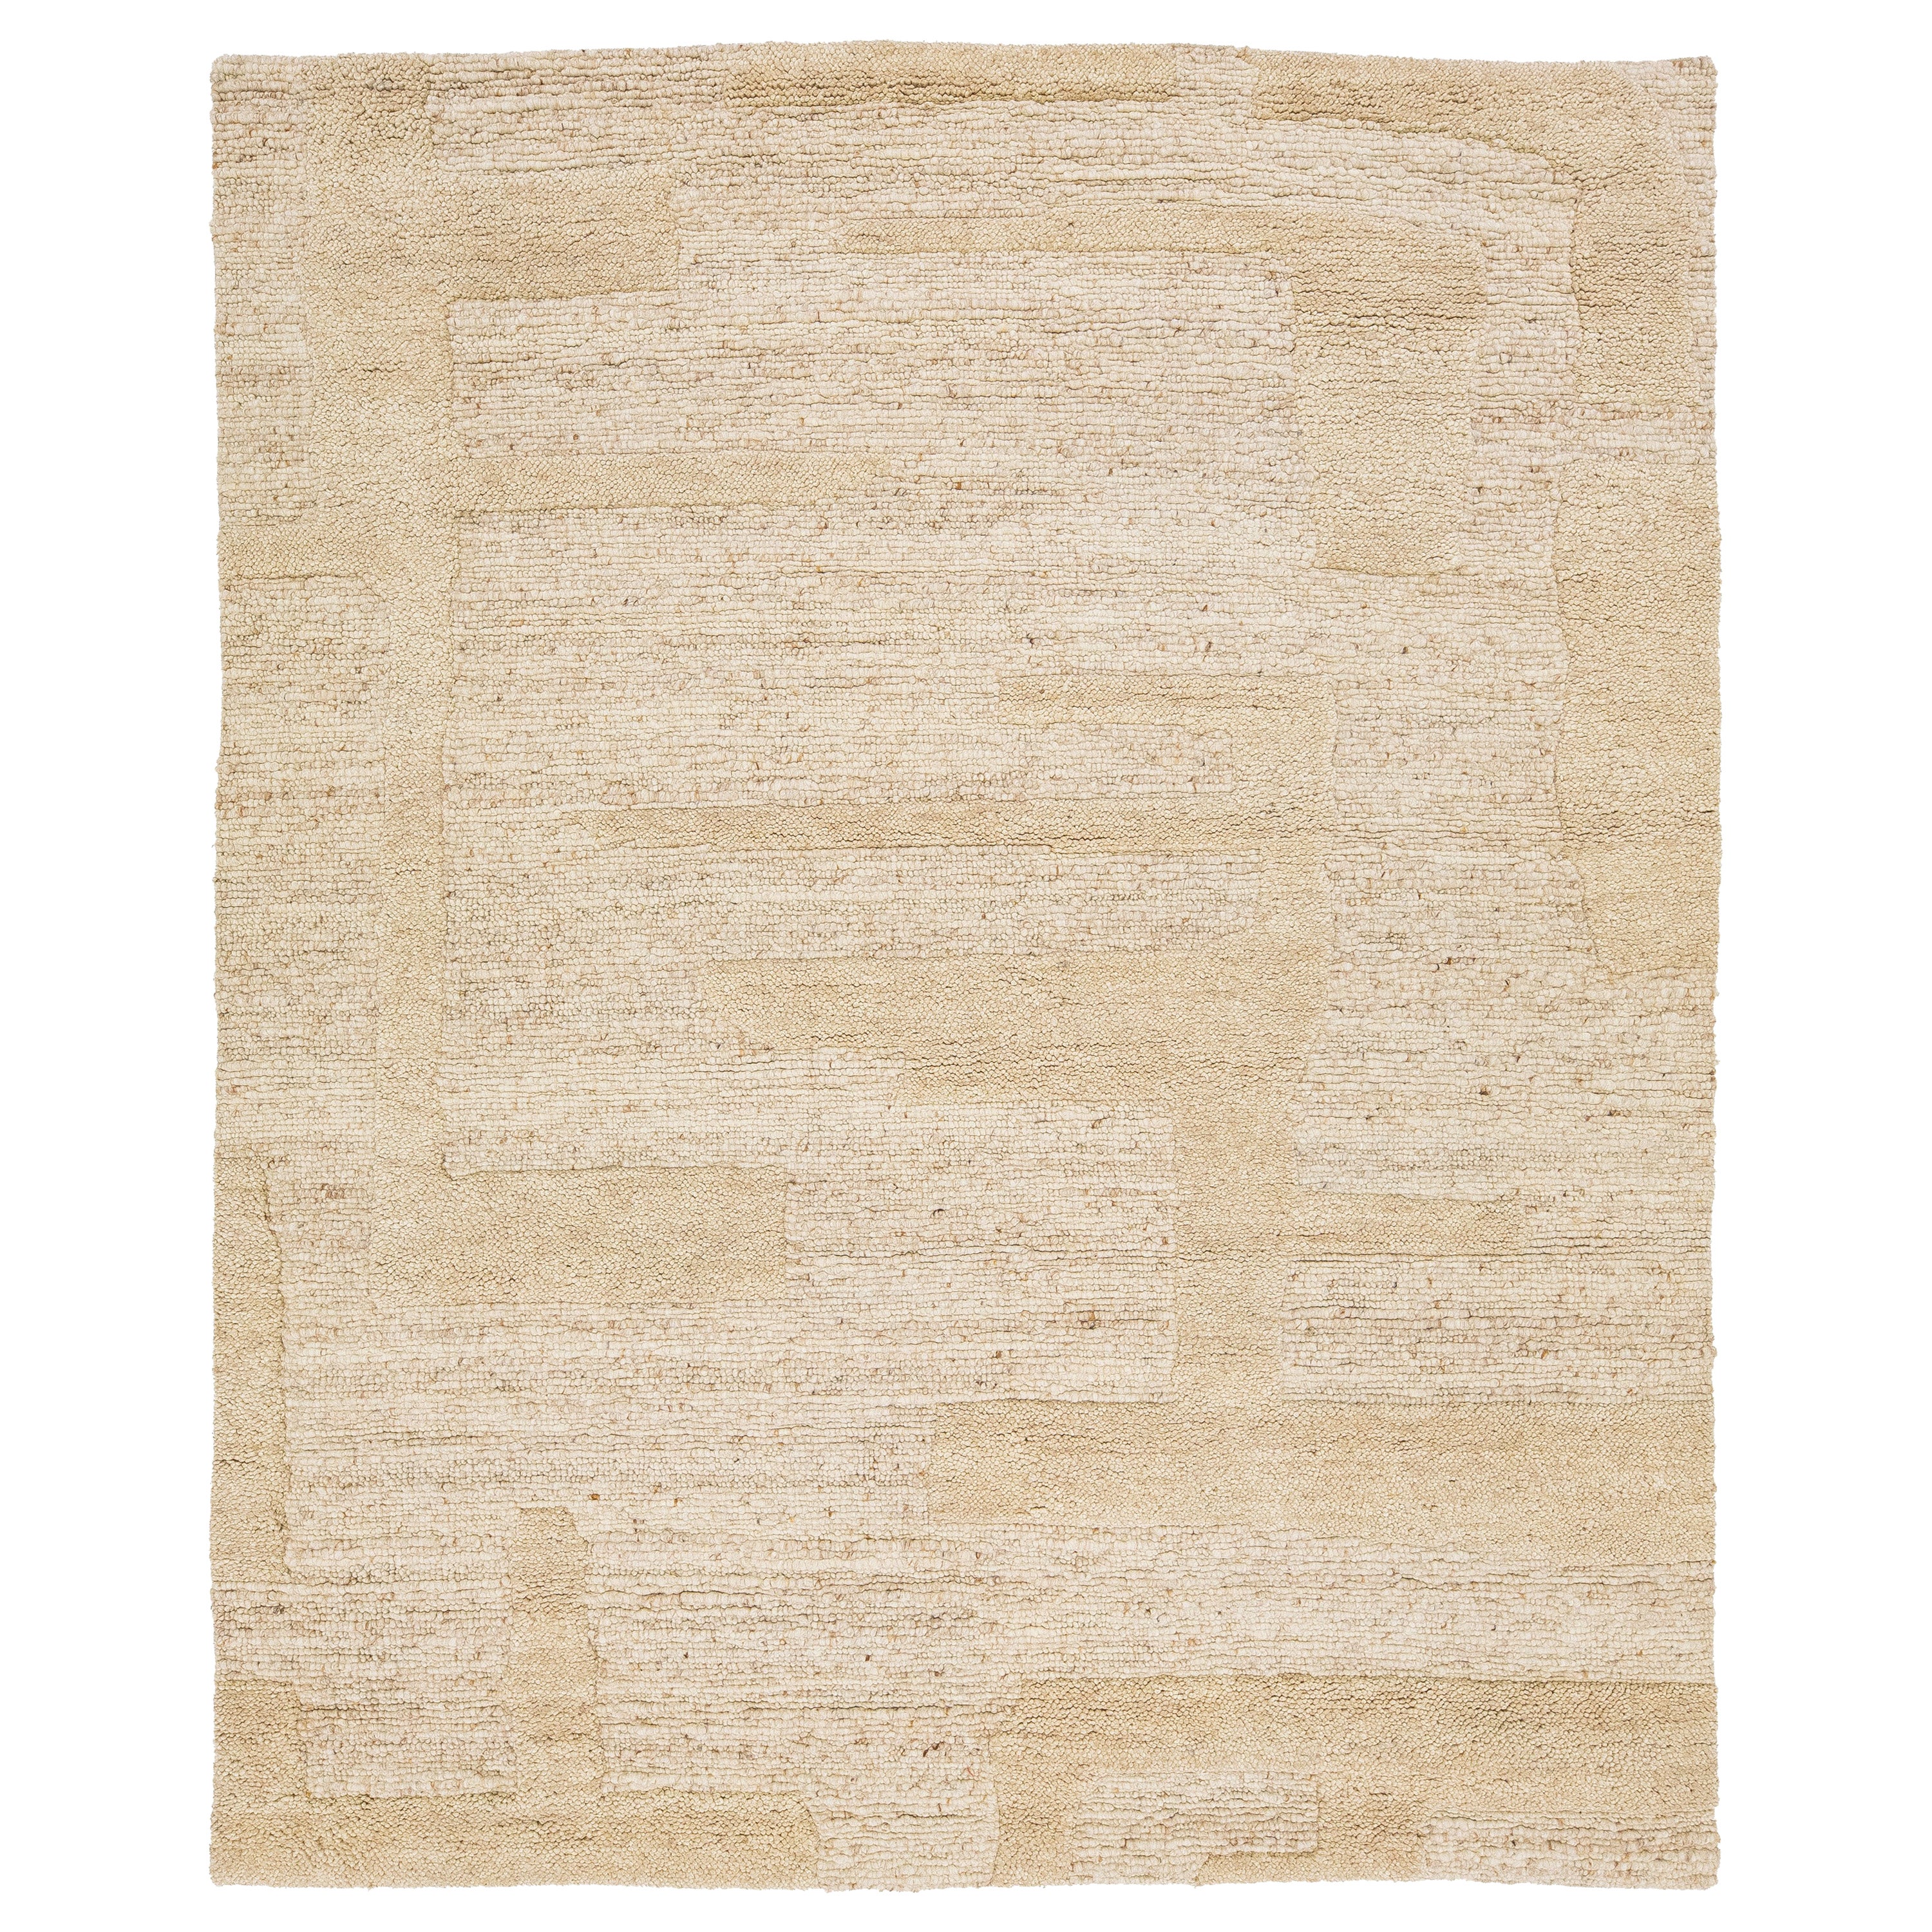 Beige Contemporary Moroccan-Style Wool Rug With Geometric Pattern By Apadana